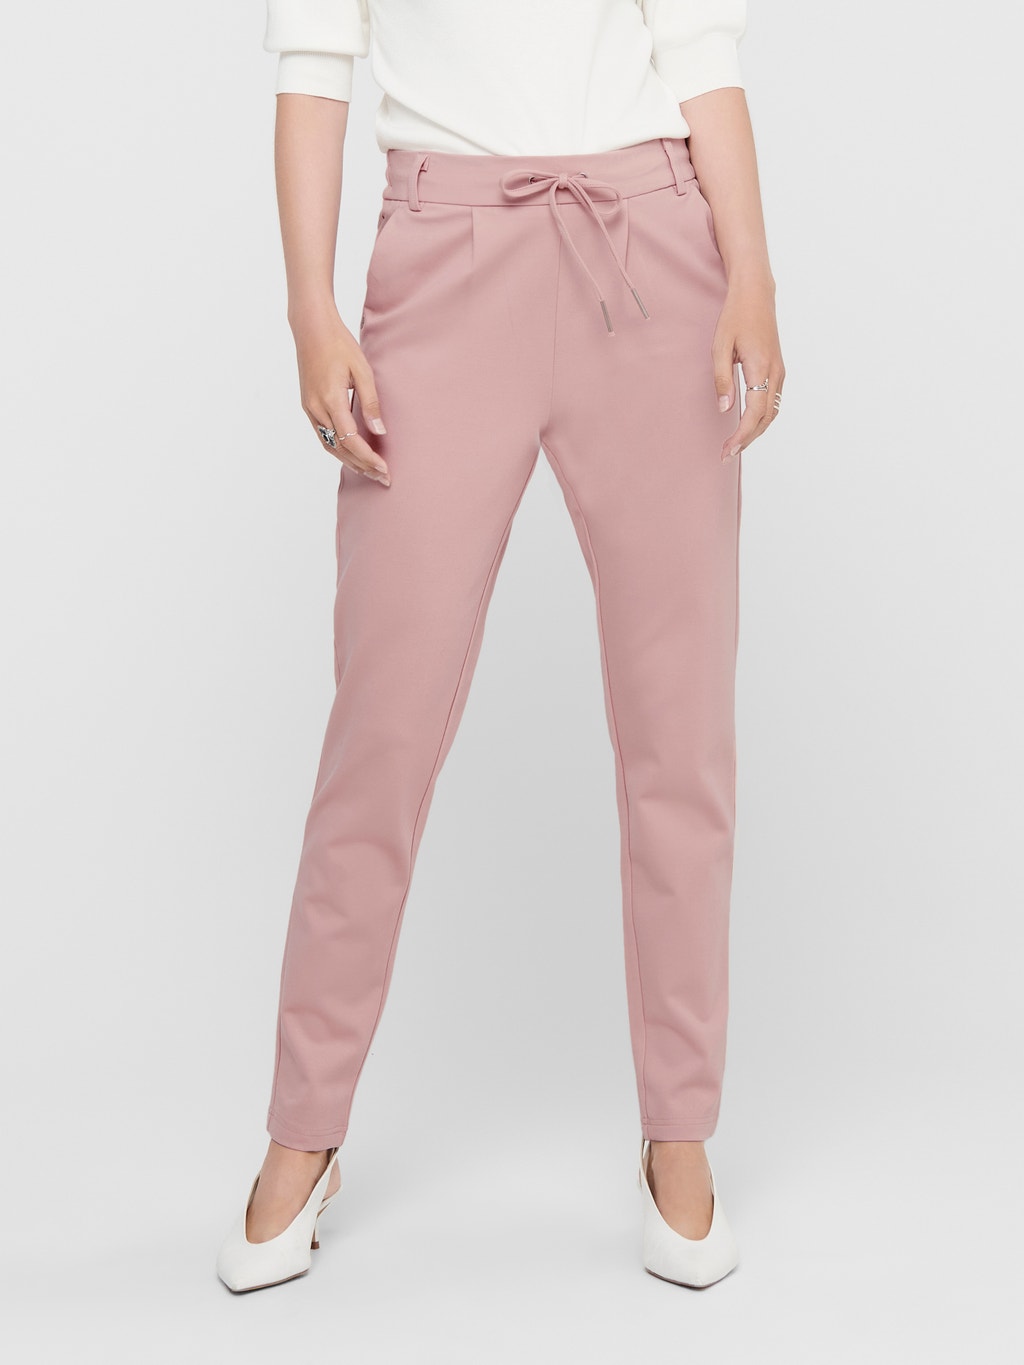 Poptrash Trousers Light Rose | ONLY®